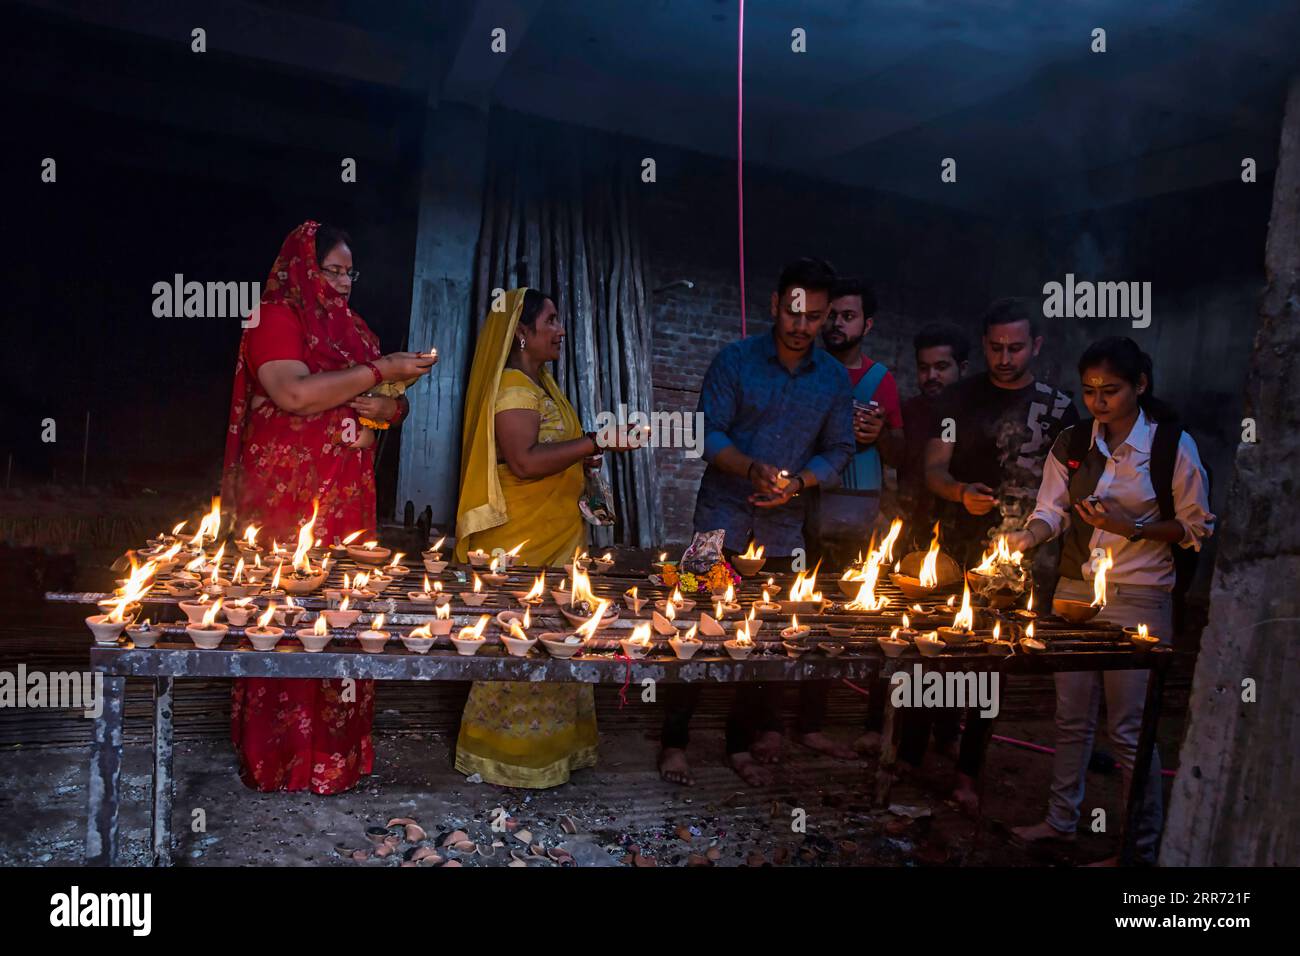 Vrindavan, Mathura, October 19th, 2020: Devotees lighting clay lamps to show there love and respect to Lord Shri Krishna at Banke Bihari temple Stock Photo